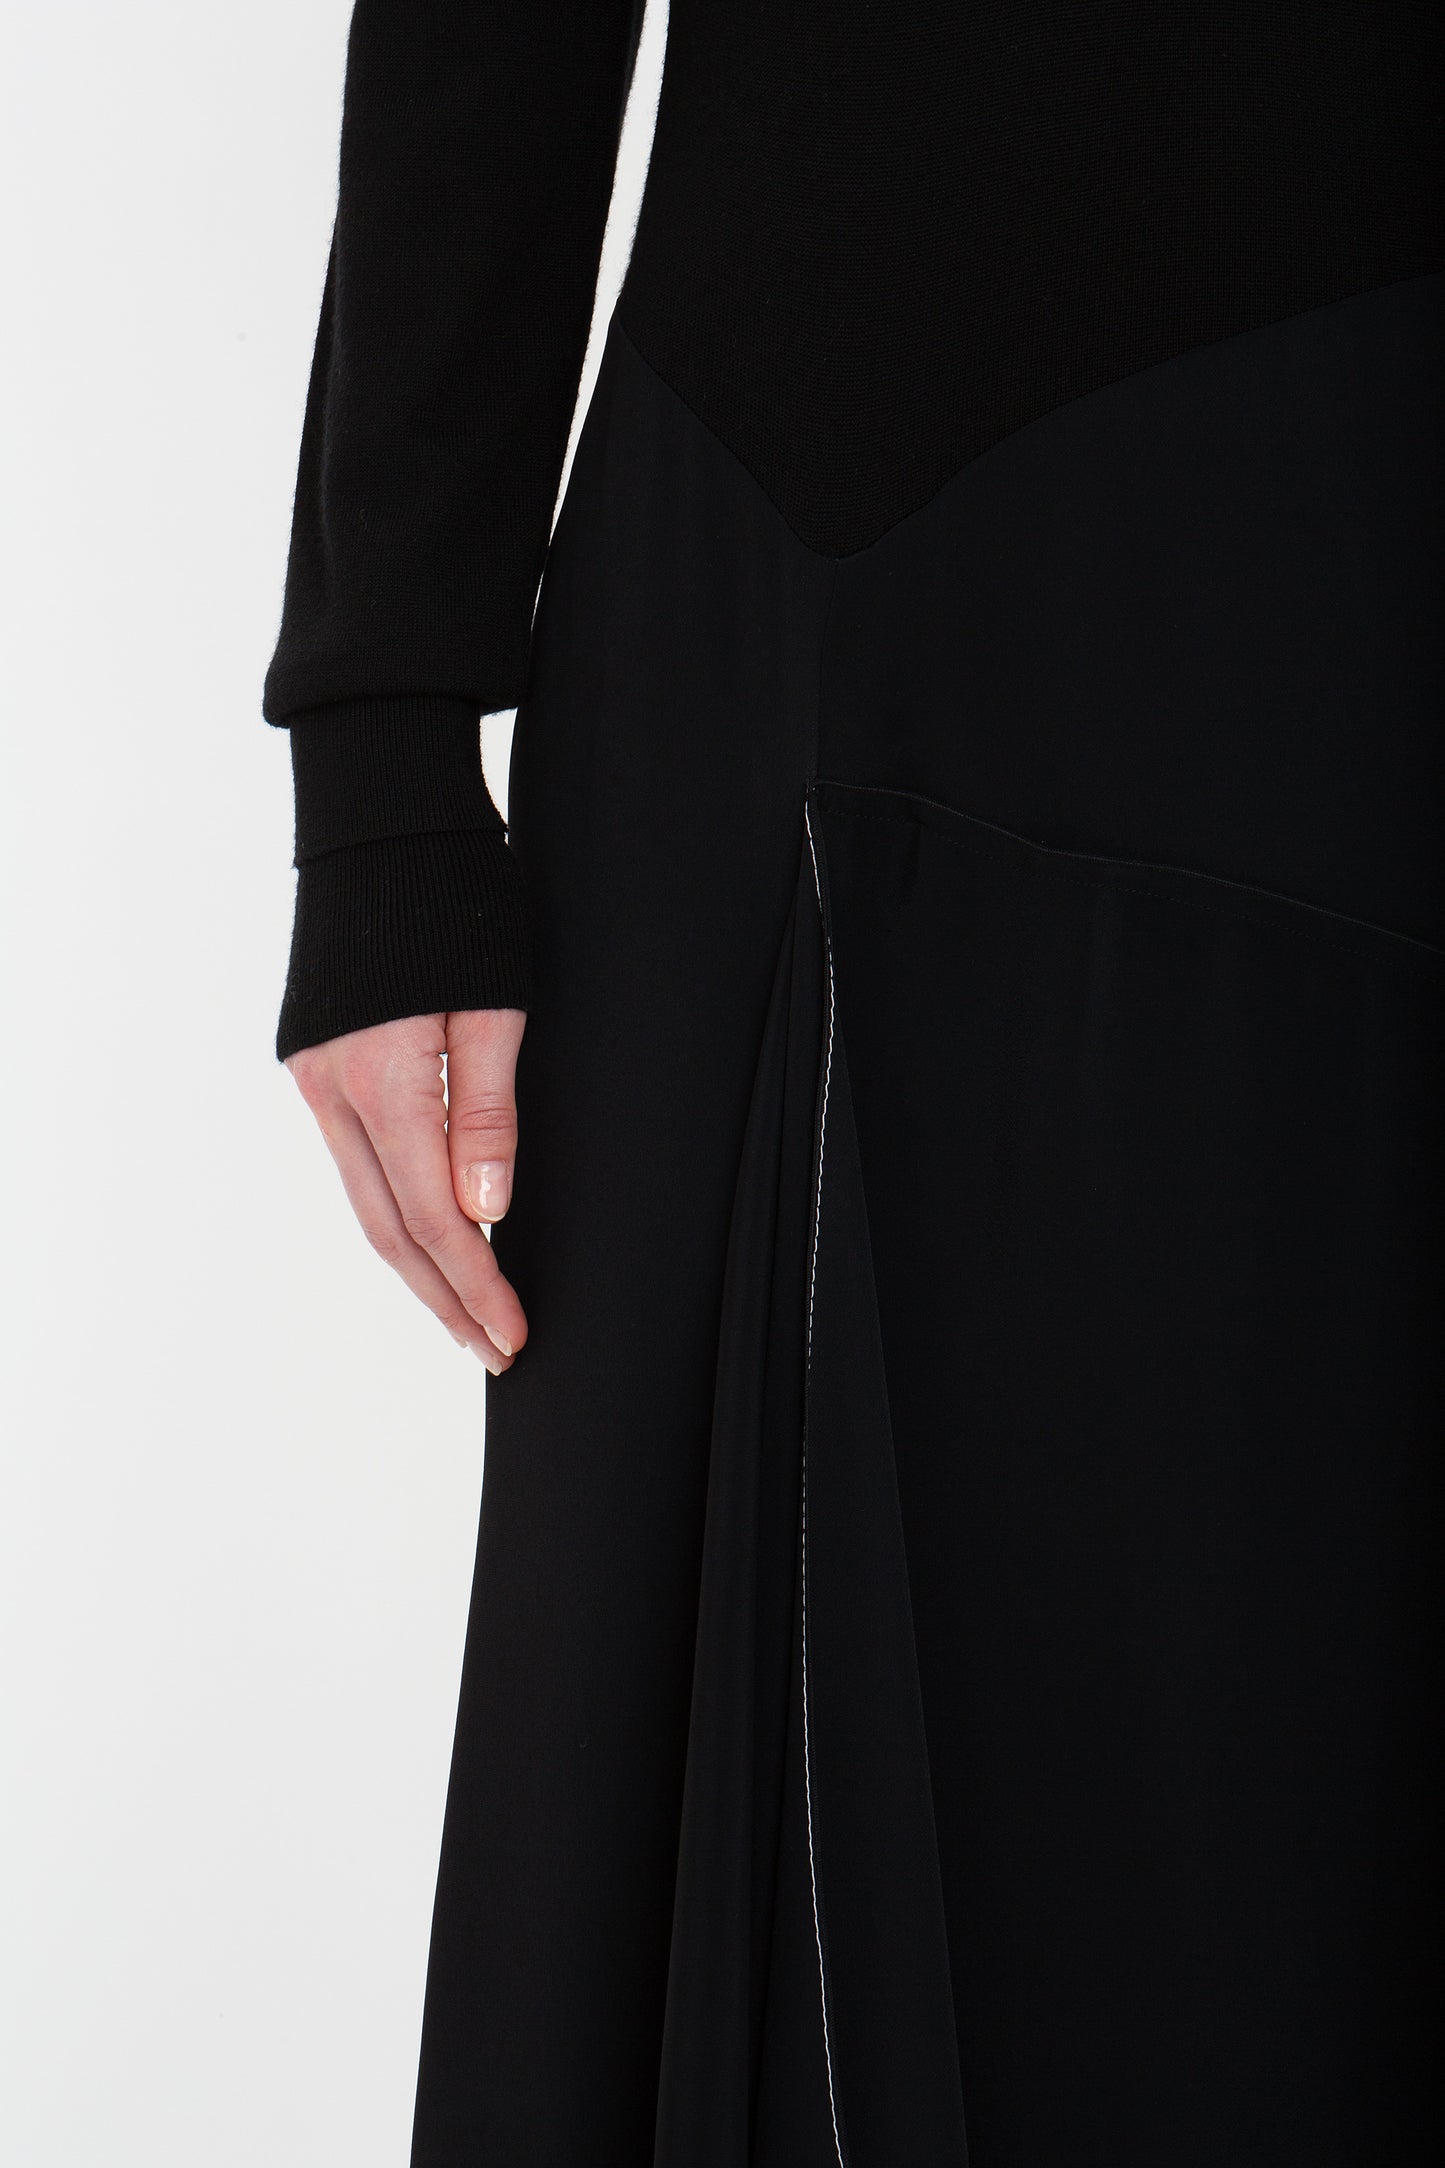 A person in a Henley Shirt Dress In Black by Victoria Beckham, possibly made of merino wool knit, is shown, with one hand visible and resting alongside the dress. The photo focuses on the lower torso and hand area.